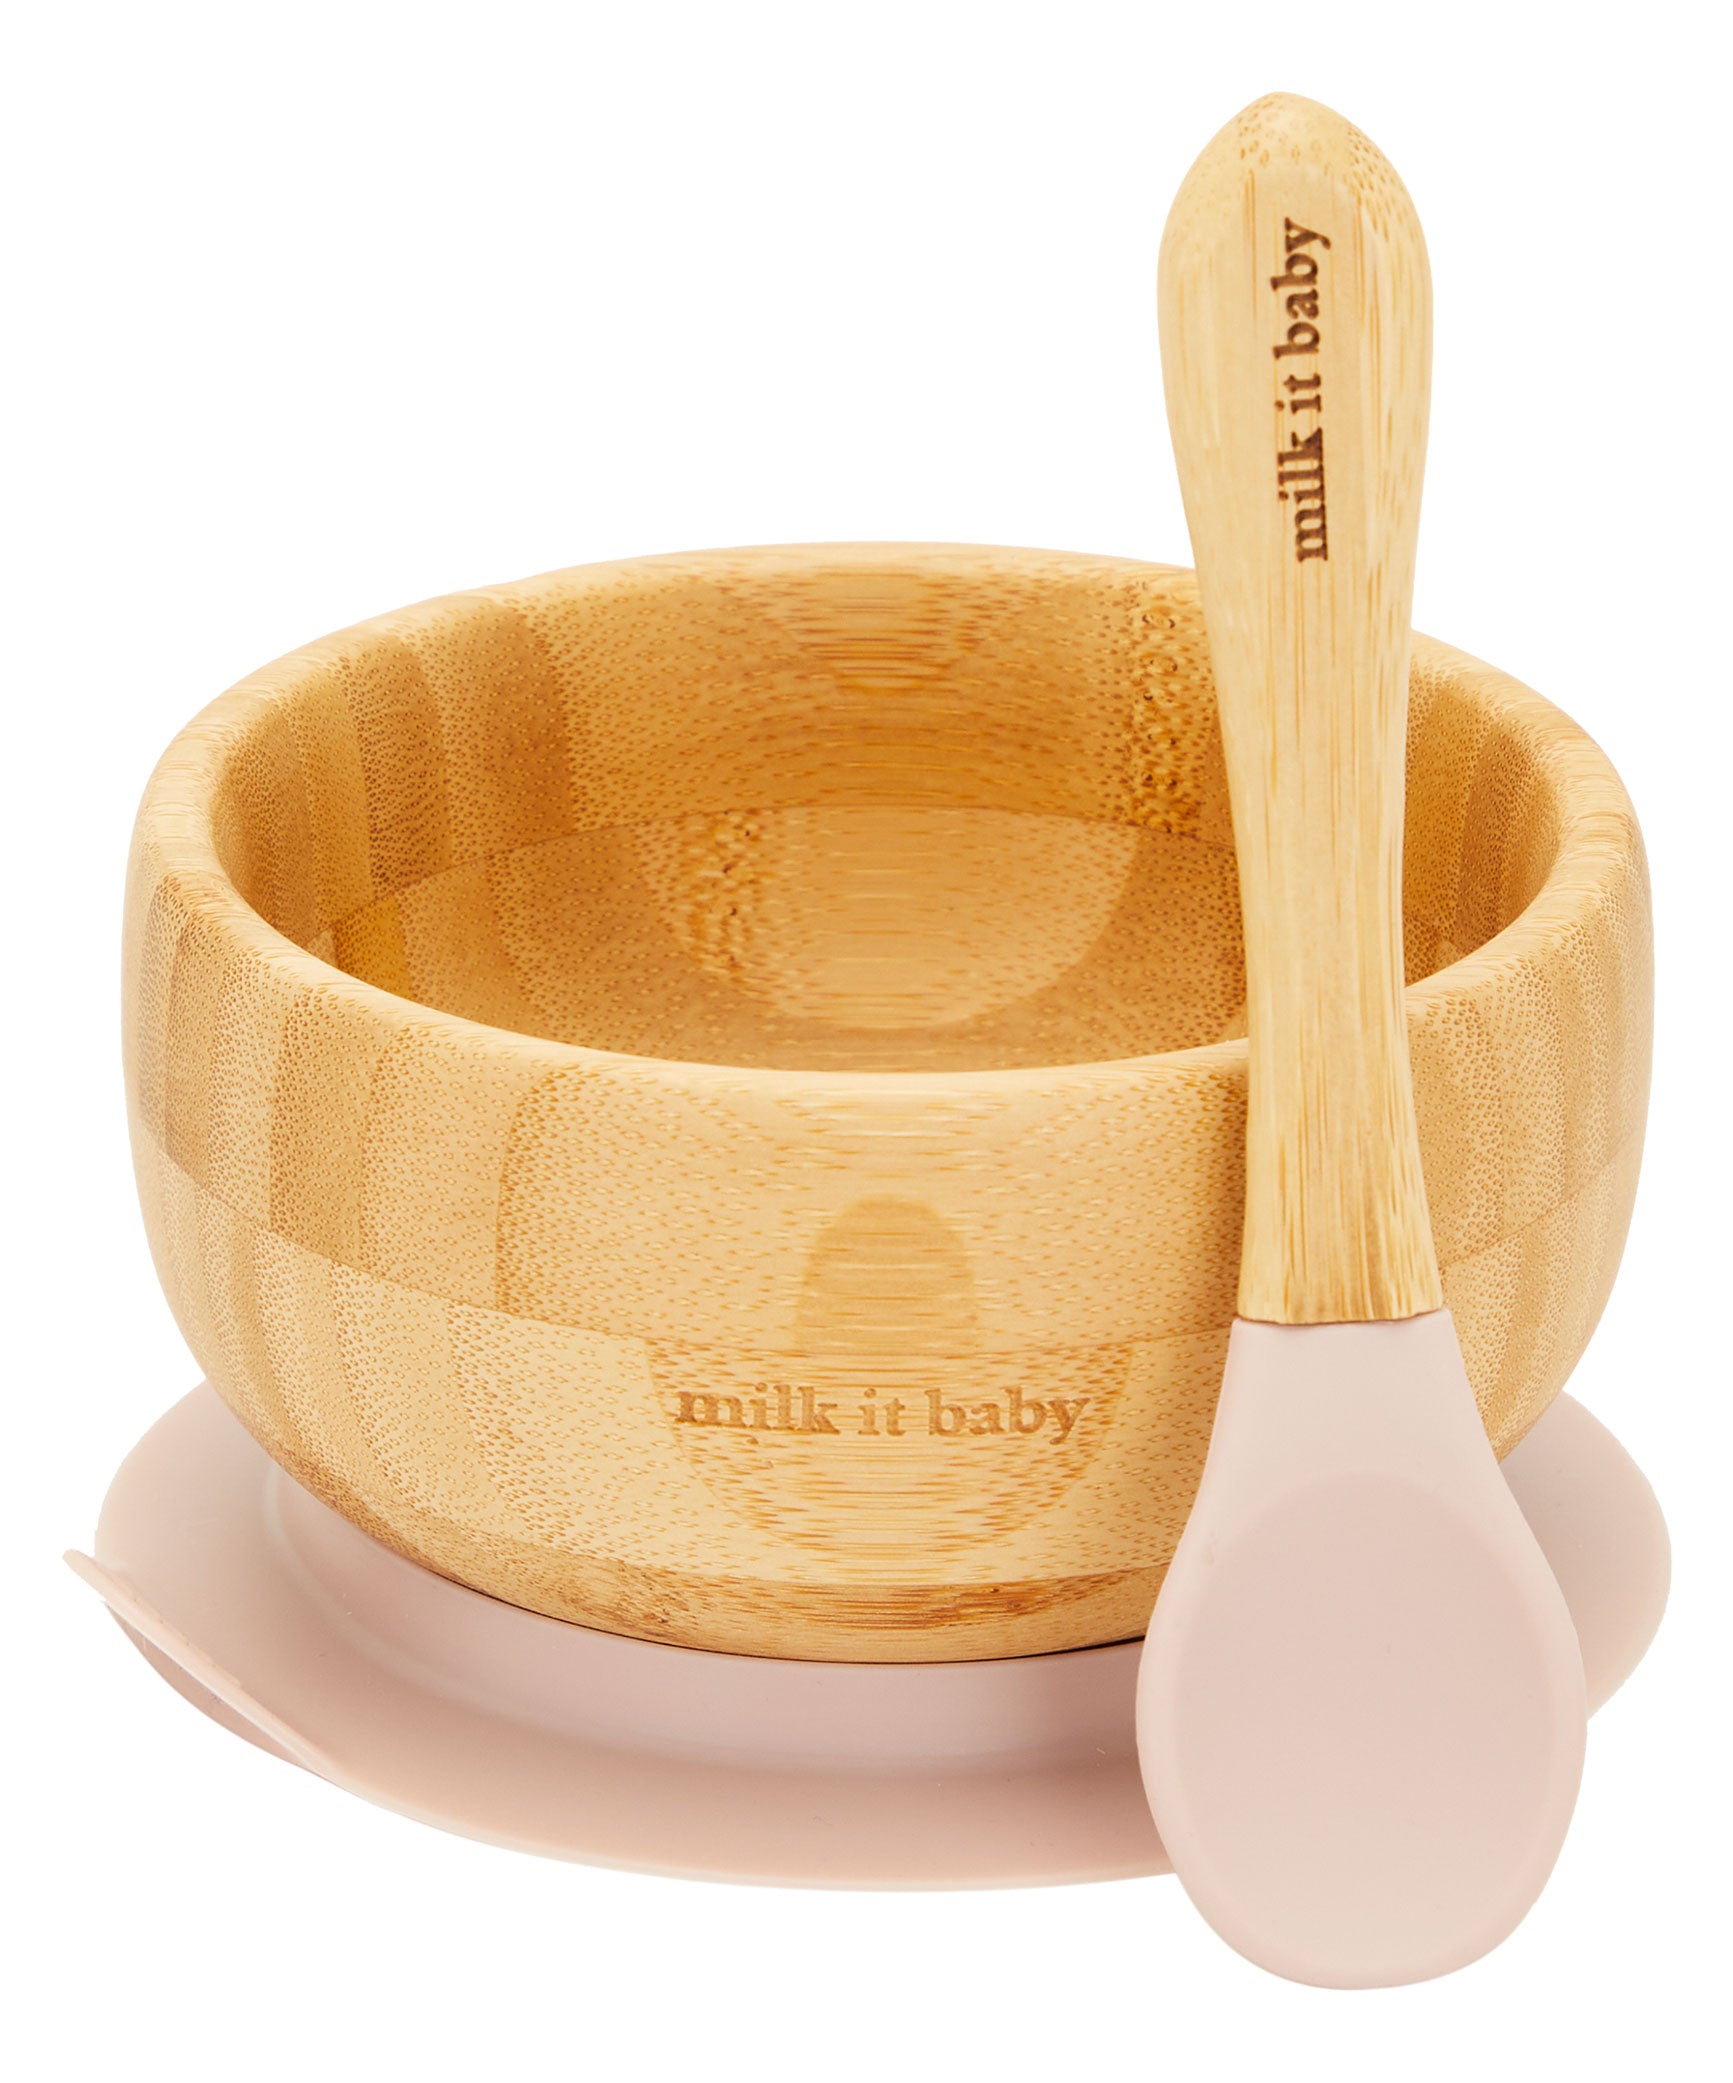 Milk It Baby, Bamboo Suction Baby Bowl & Spoon Set, Dusty Pink, MI-BAMBDP004